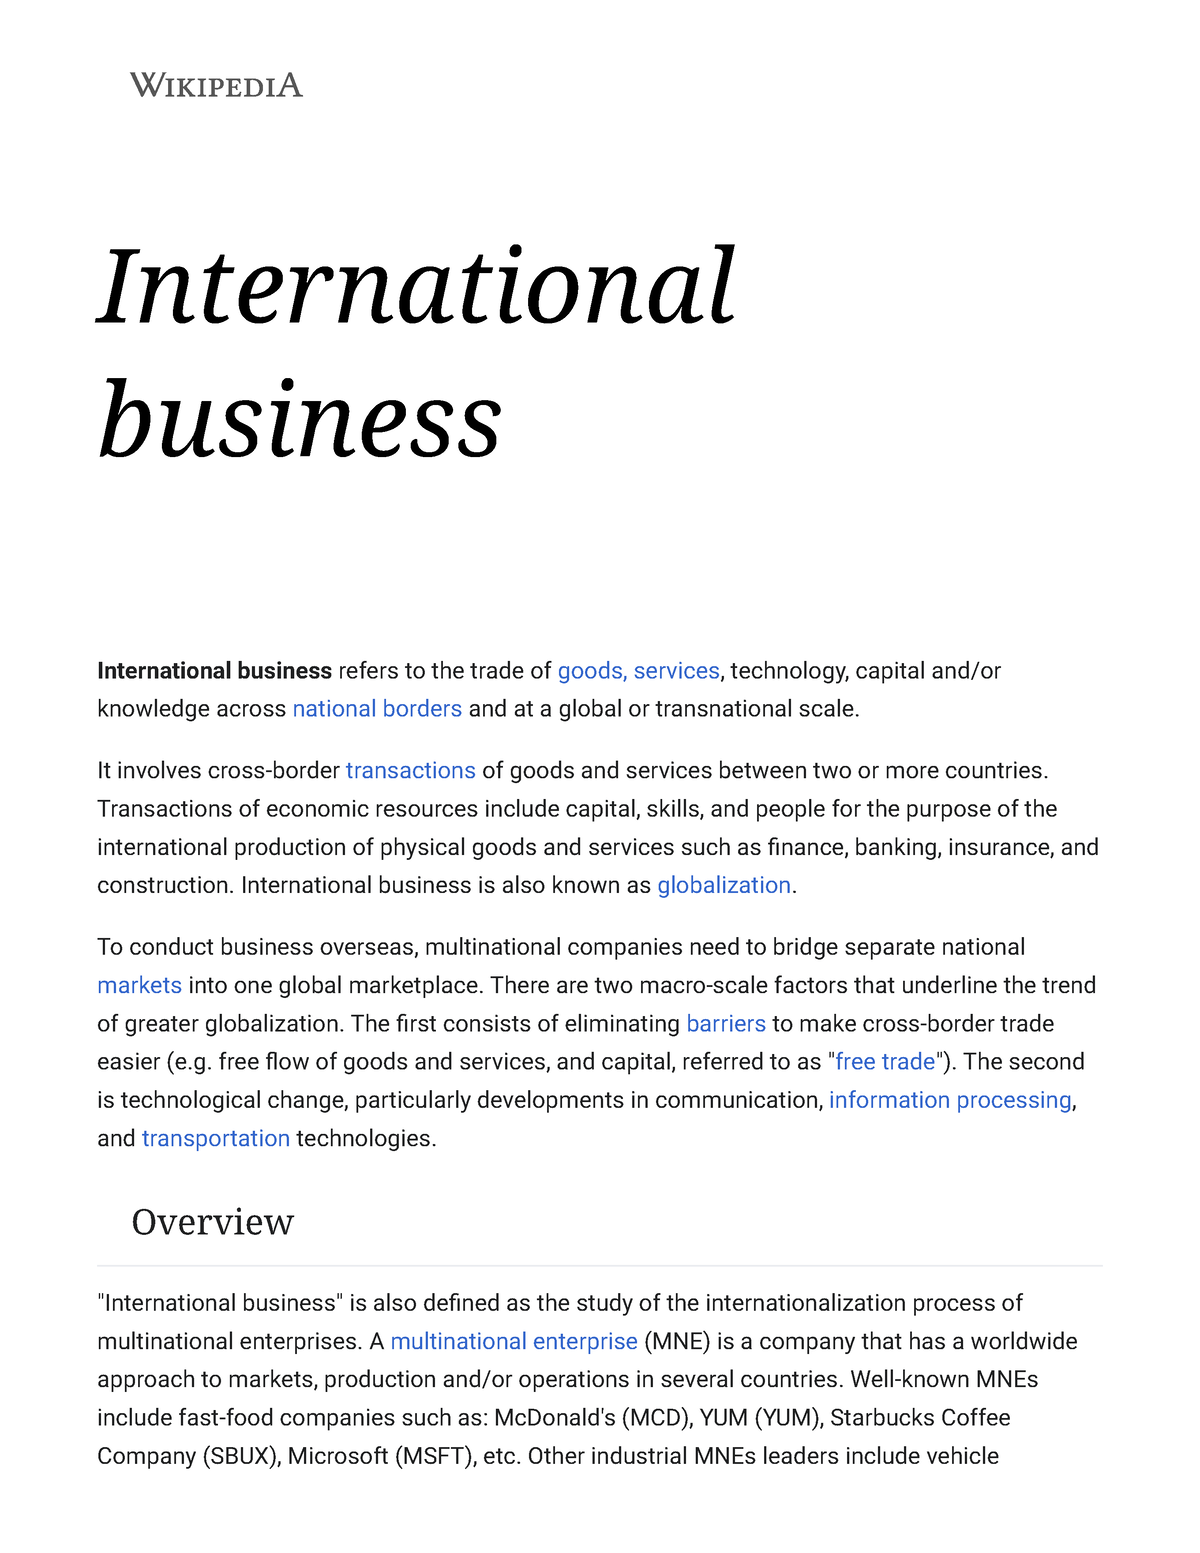 what are the various approaches to international business